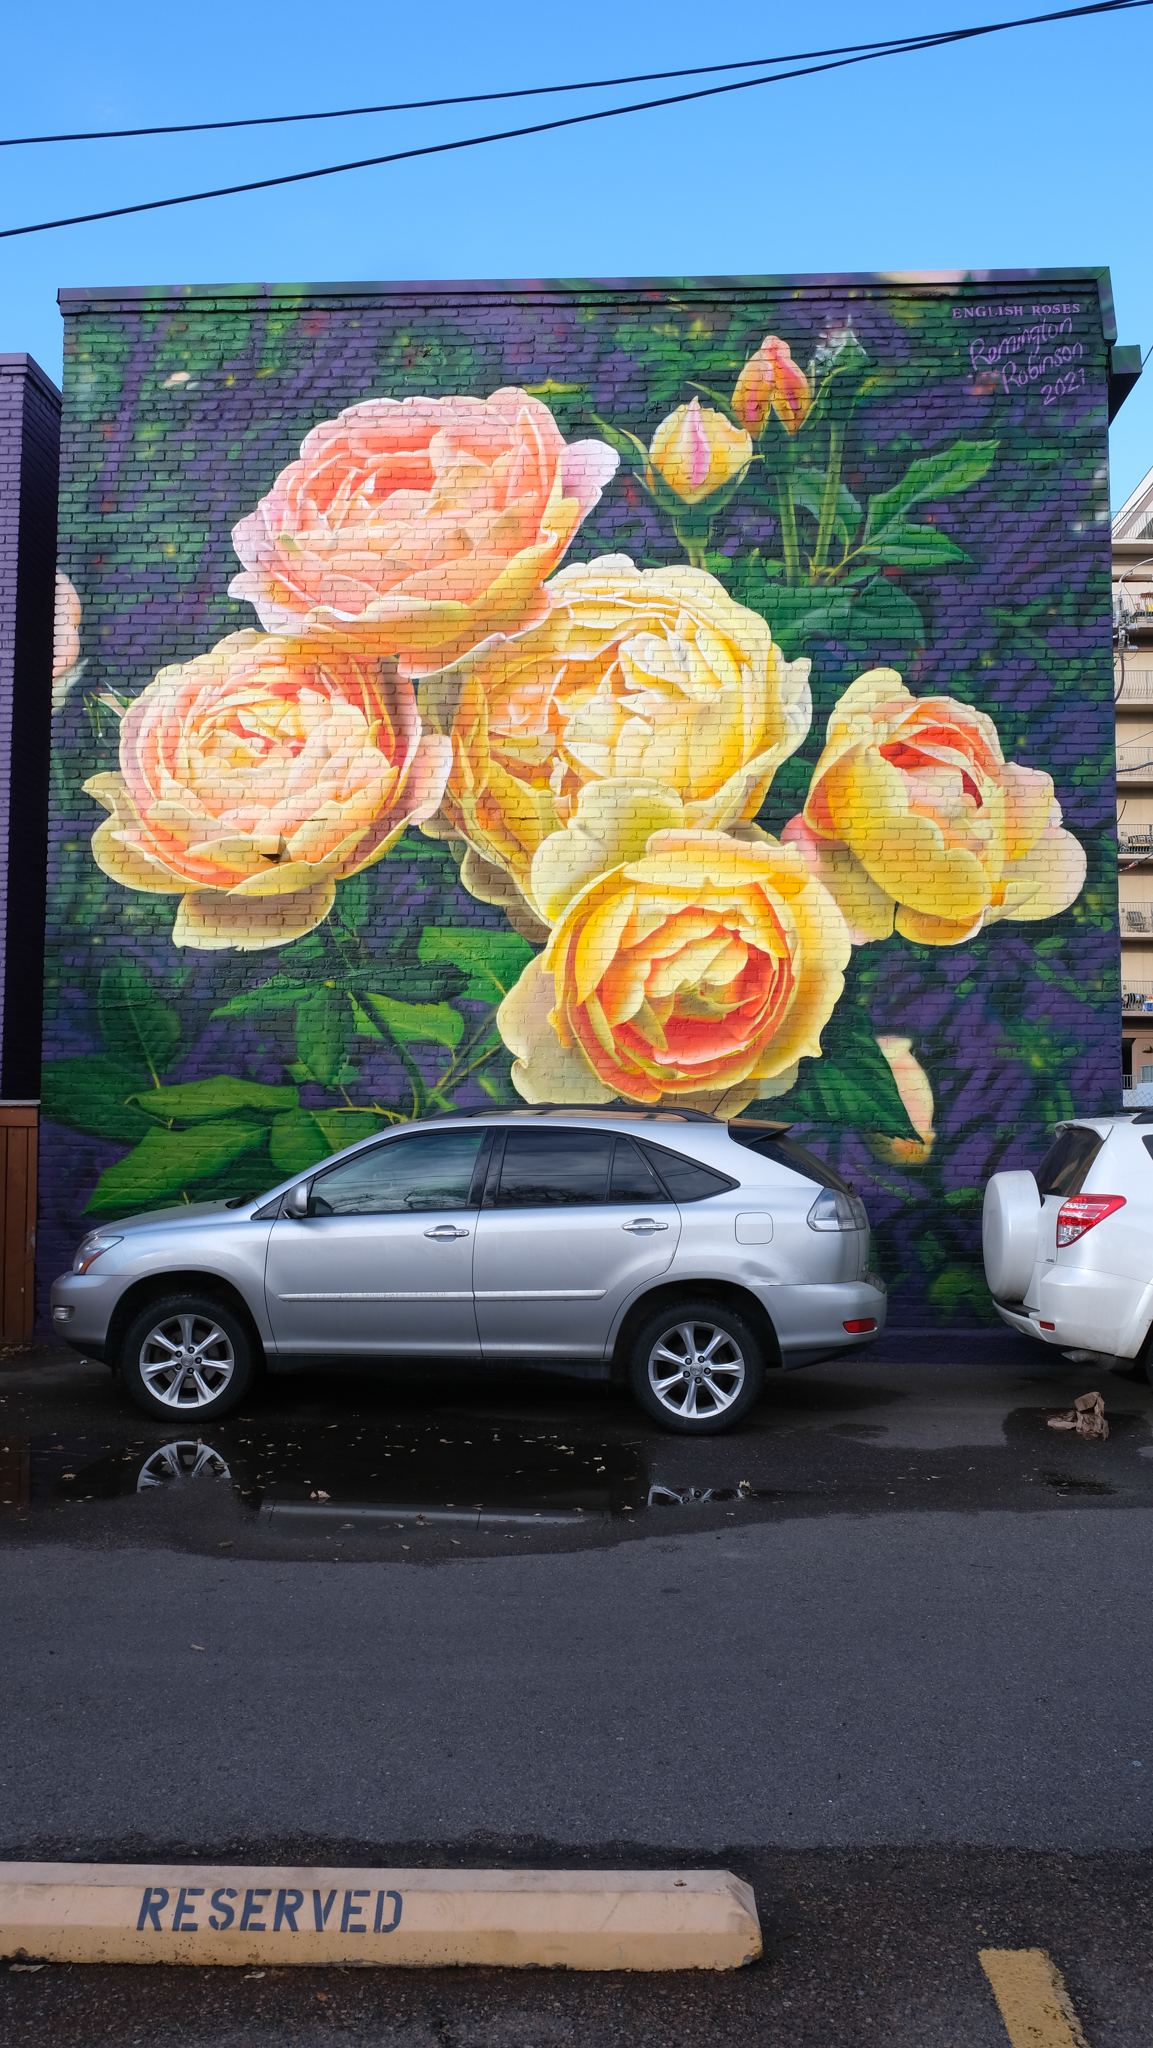 photo of artwork on a brick wall of carding mill english roses